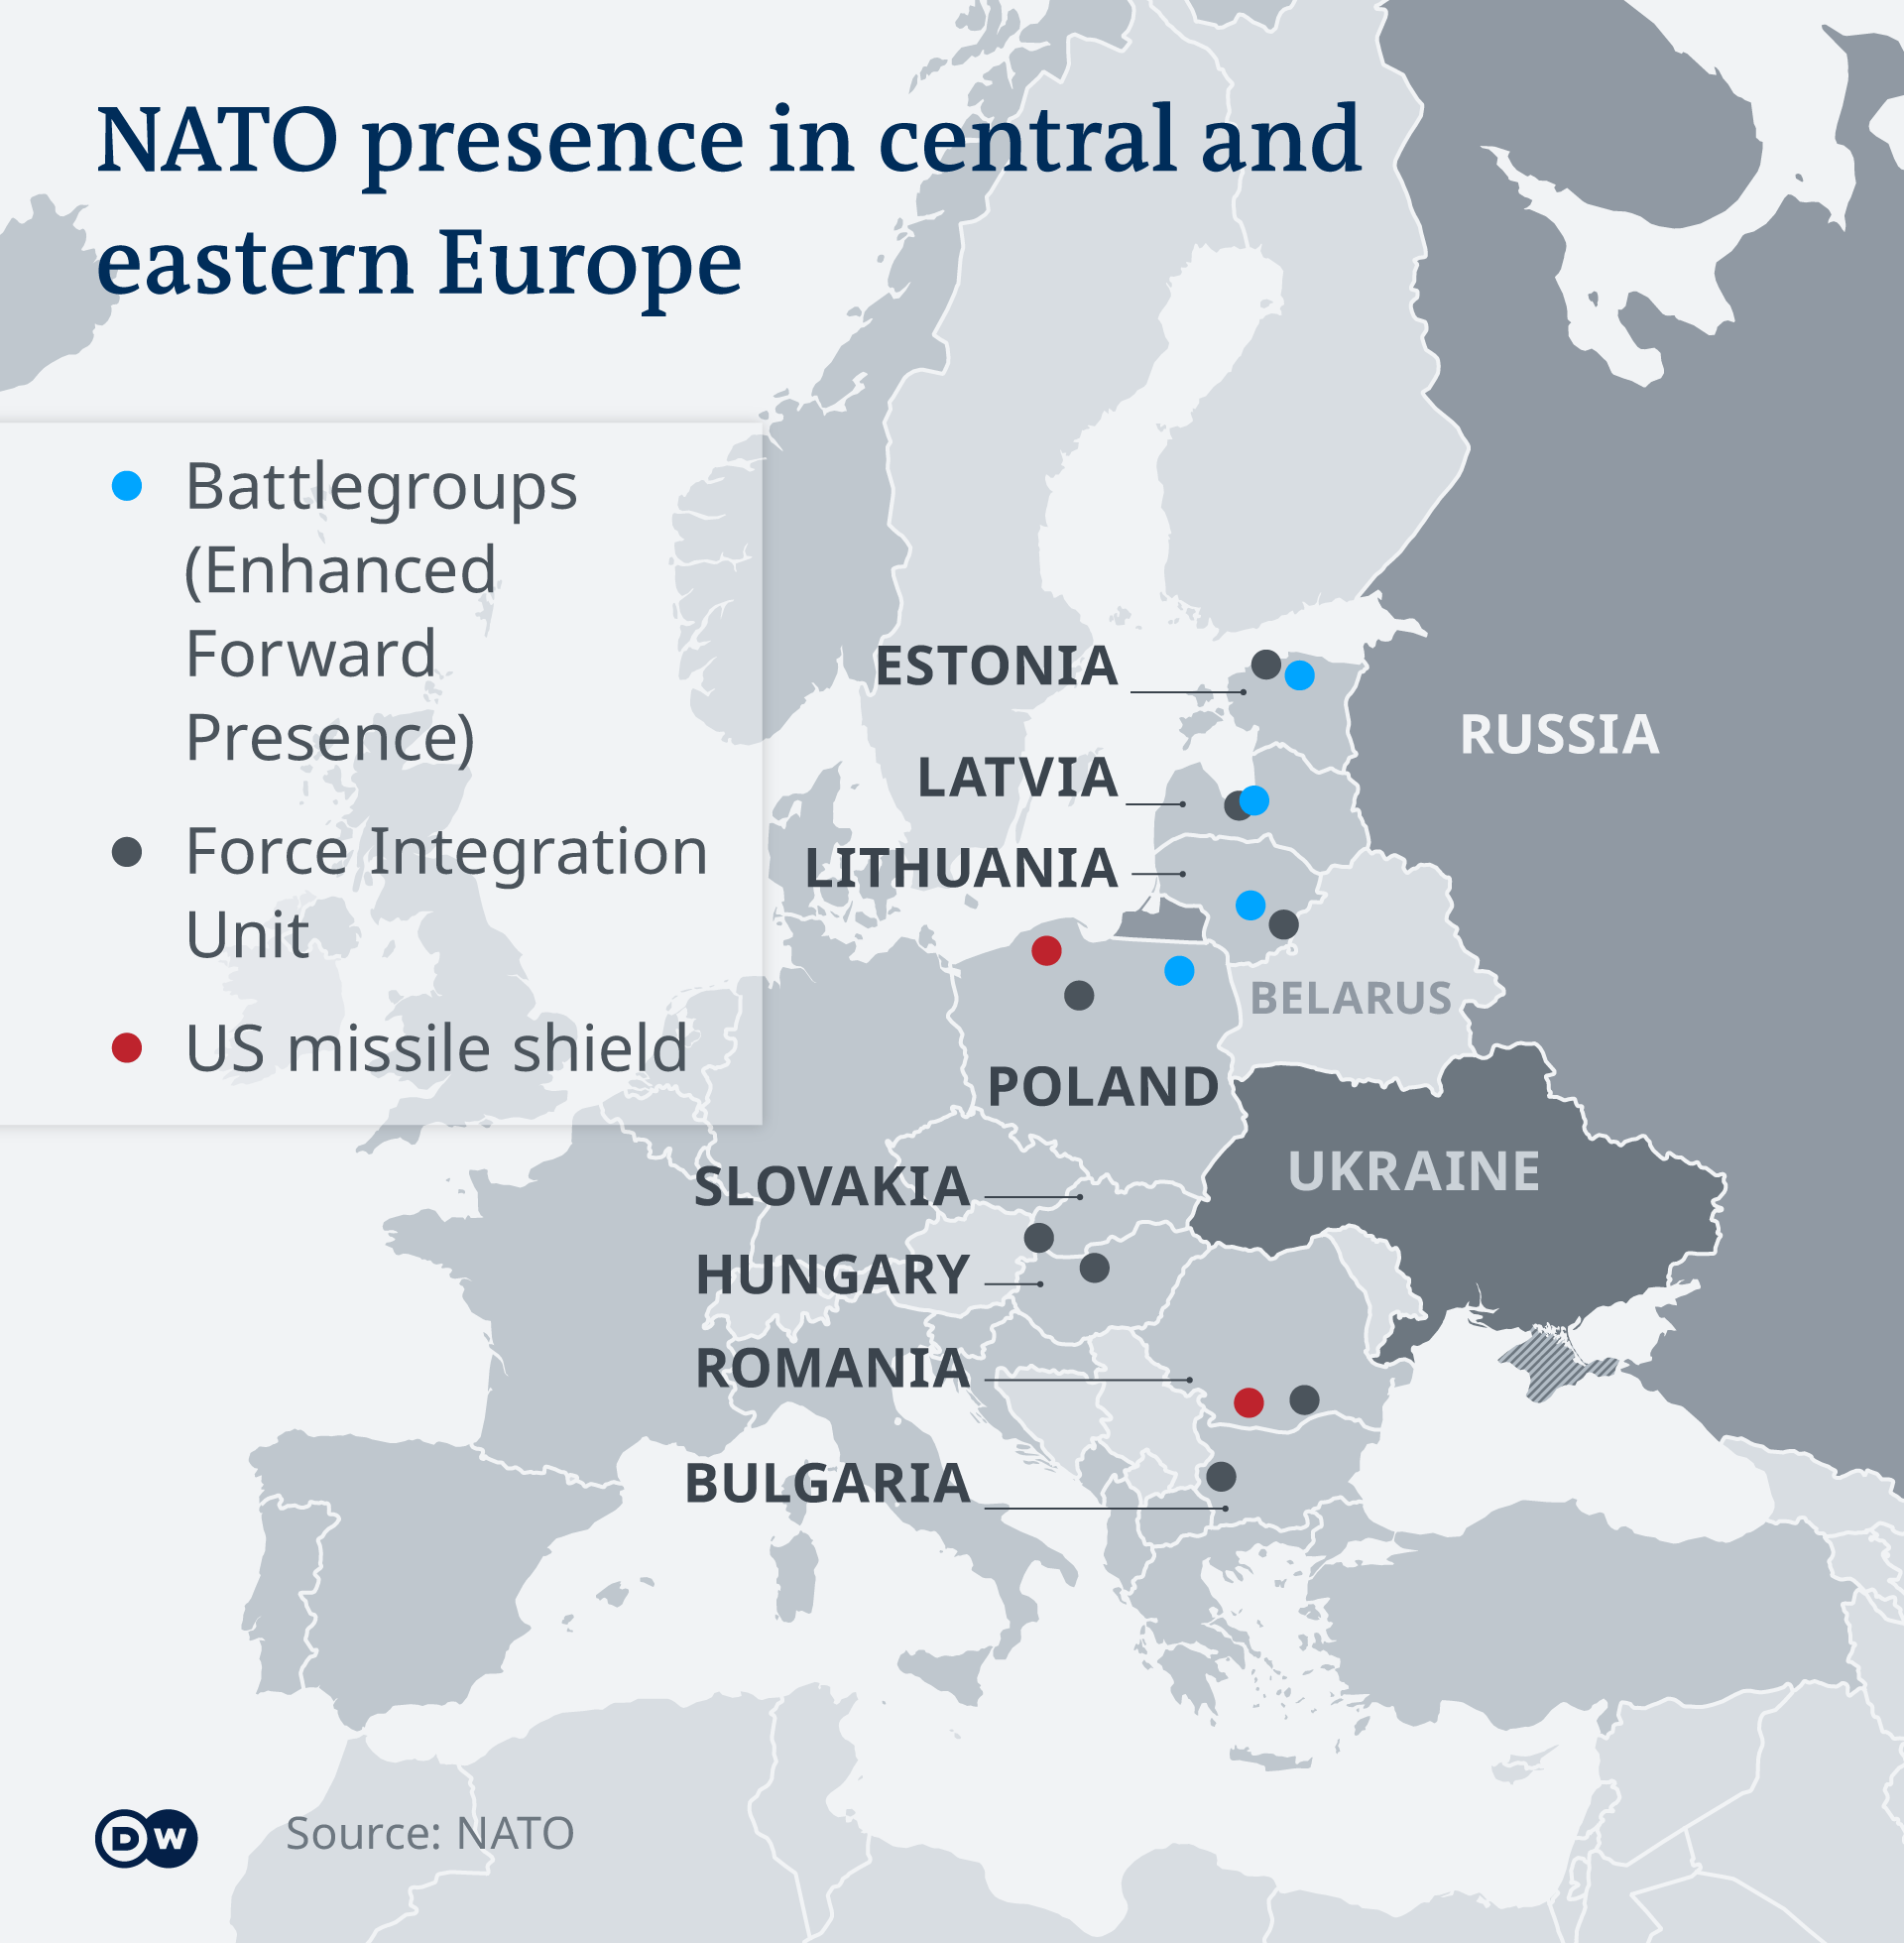 Graphic showing NATO presence in central and eastern Europe